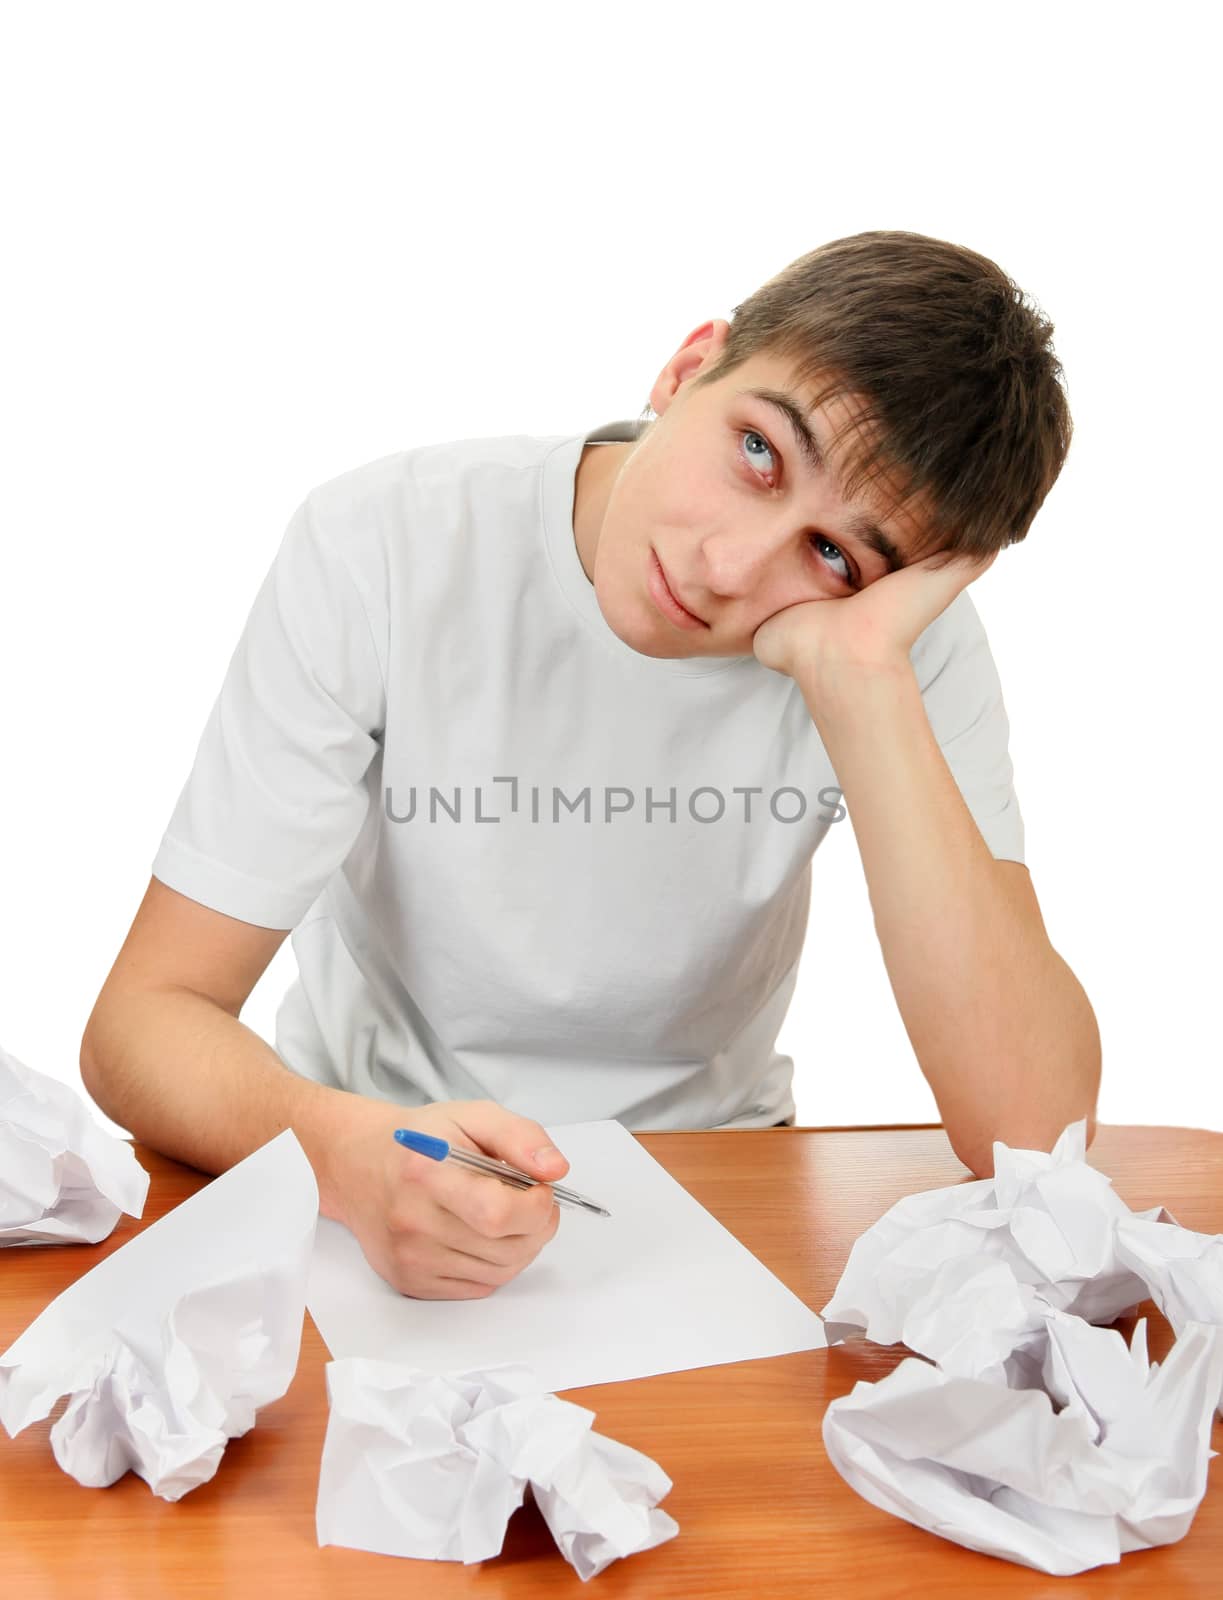 Teenager compose a Letter by sabphoto